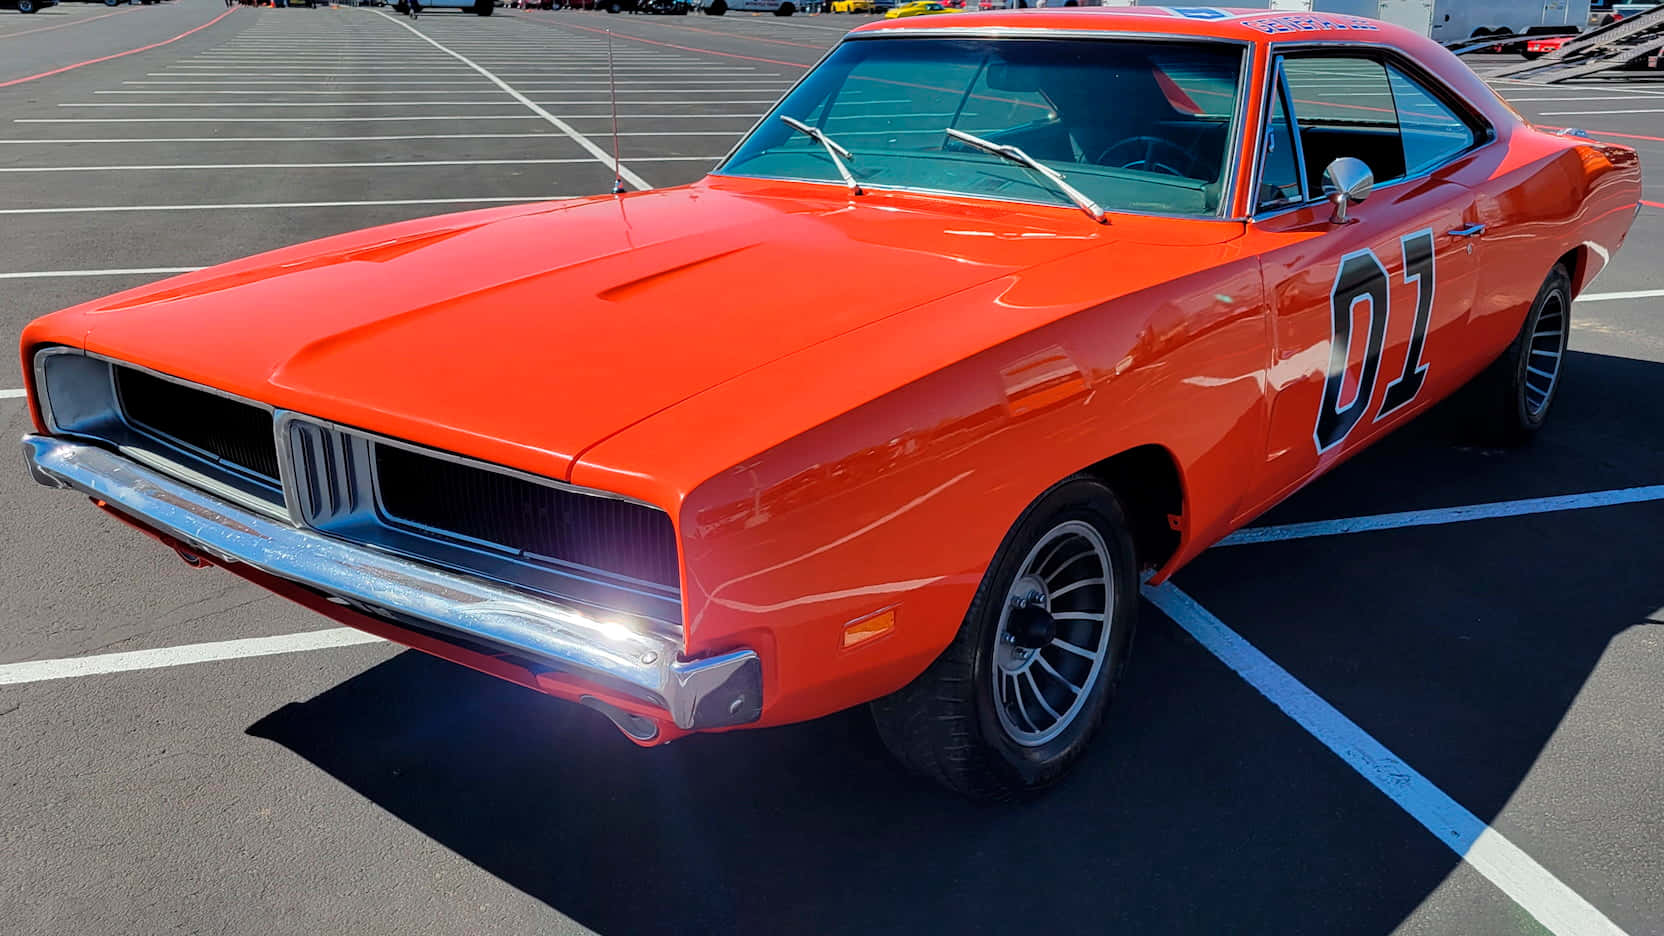 An Orange Dodge Charger Parked In A Parking Lot Wallpaper